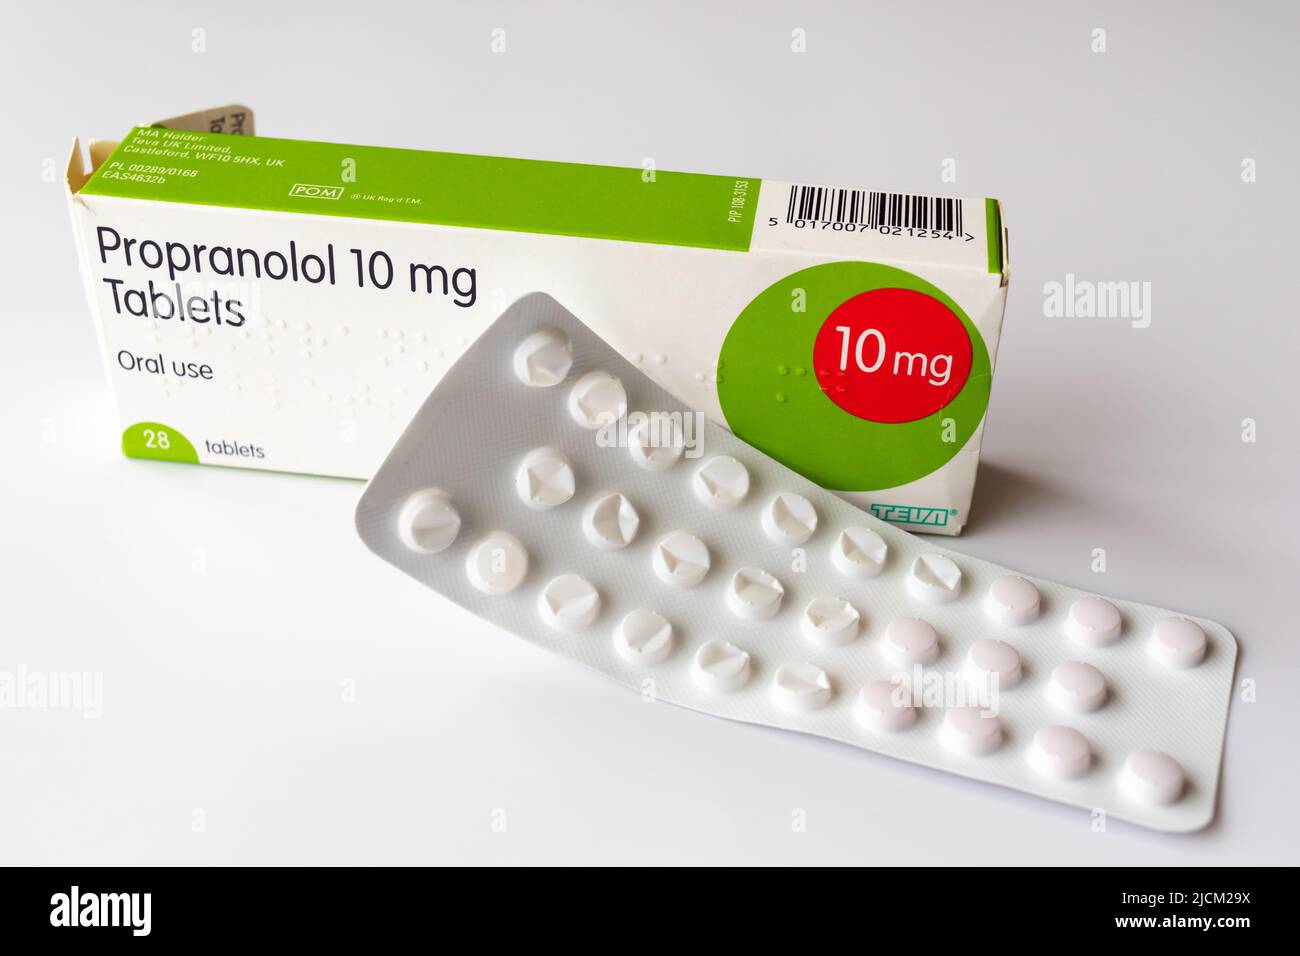 Box of Propranolol 10 mg tablets, a Beta blocker used to treat high blood pressure, heart problems, tremors & anxiety Stock Photo